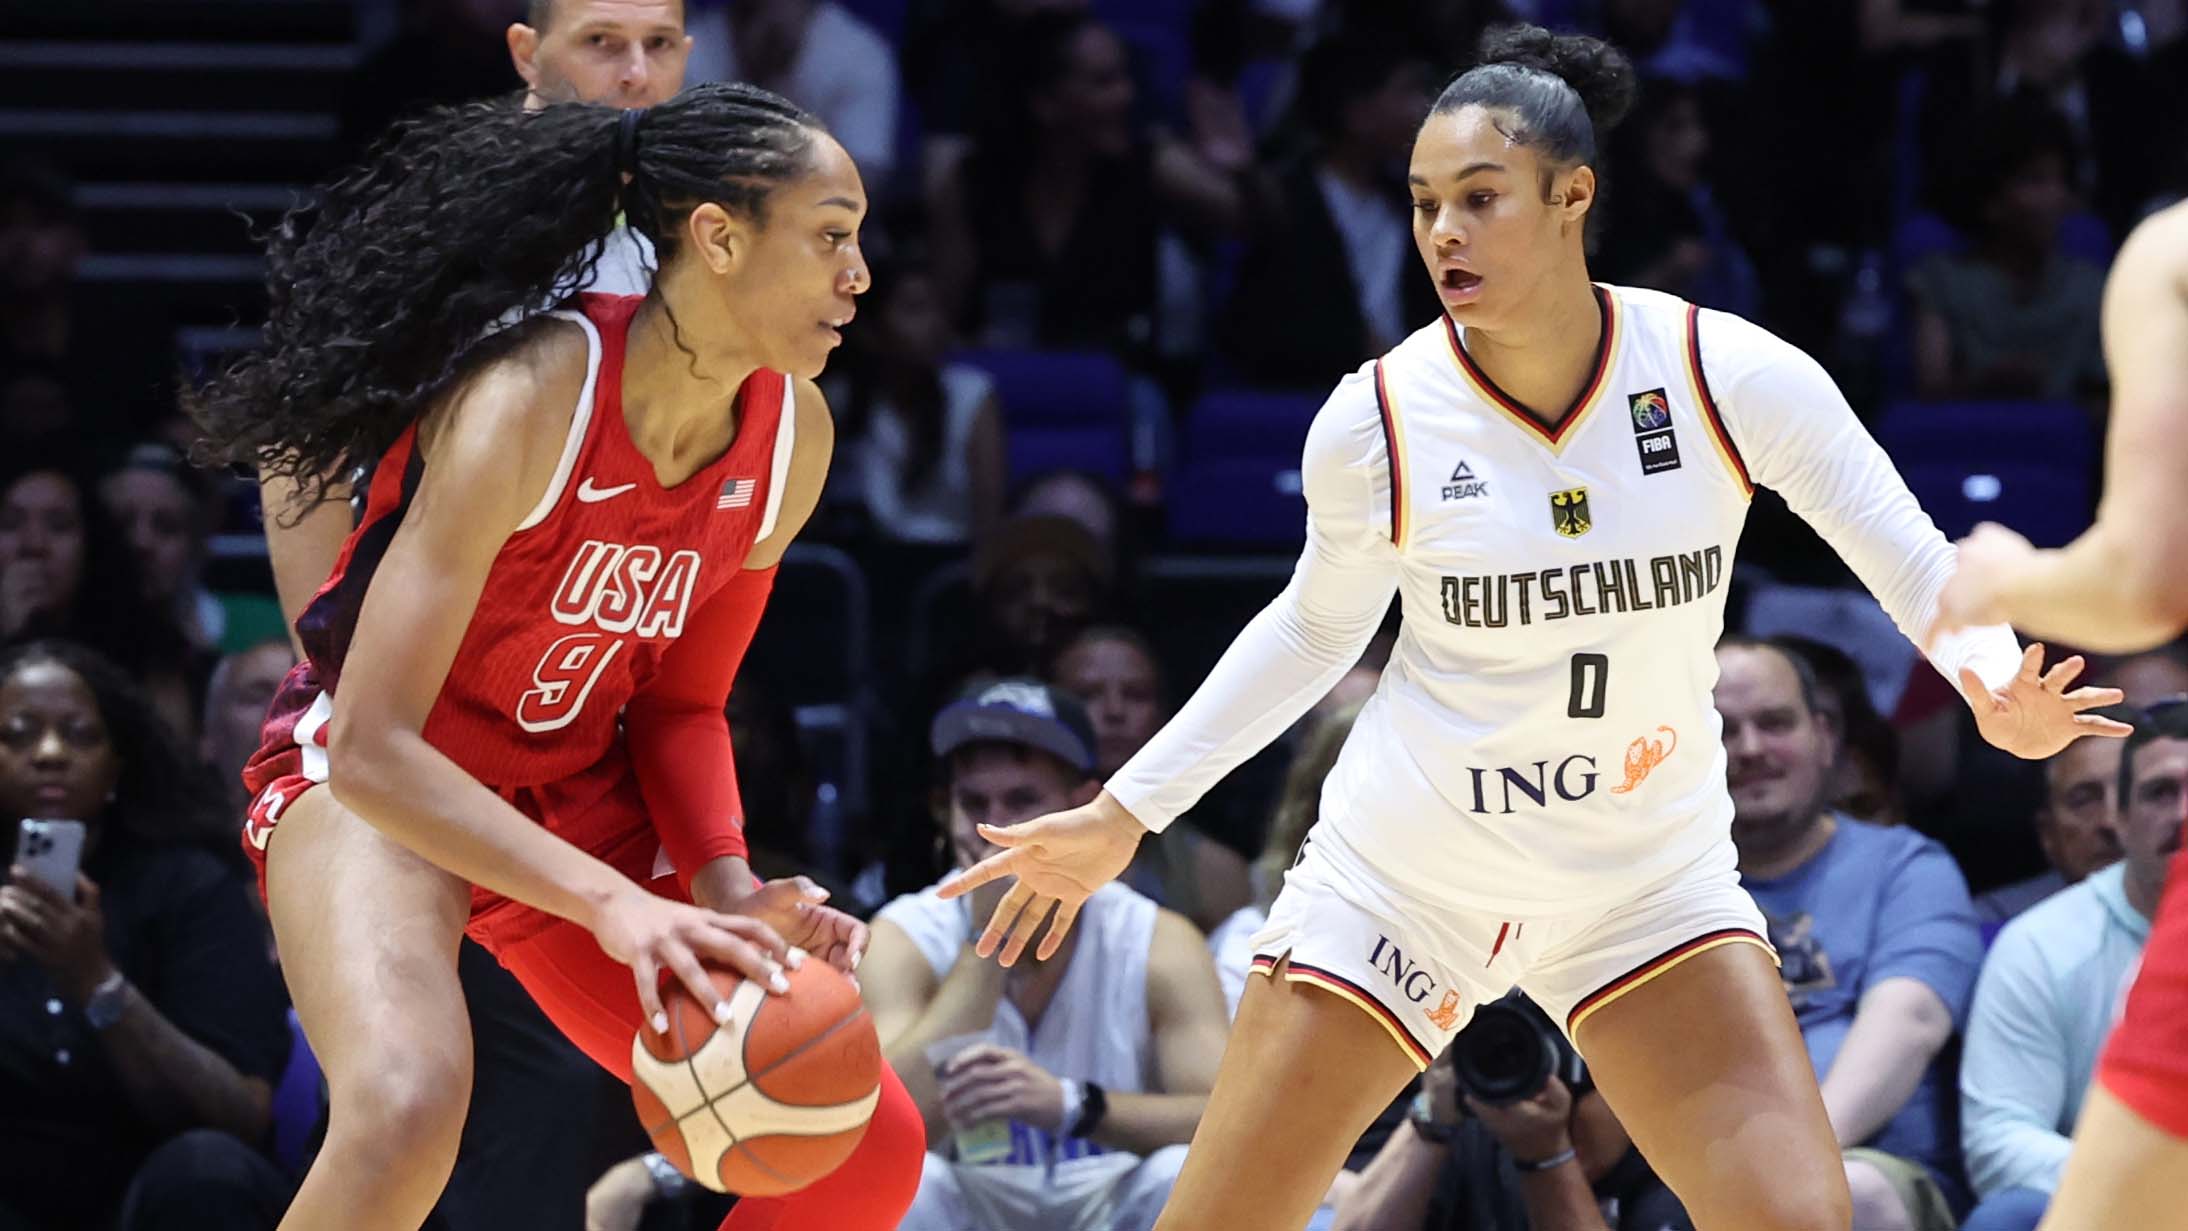 US women's basketball team rolls past Germany in exhibition game